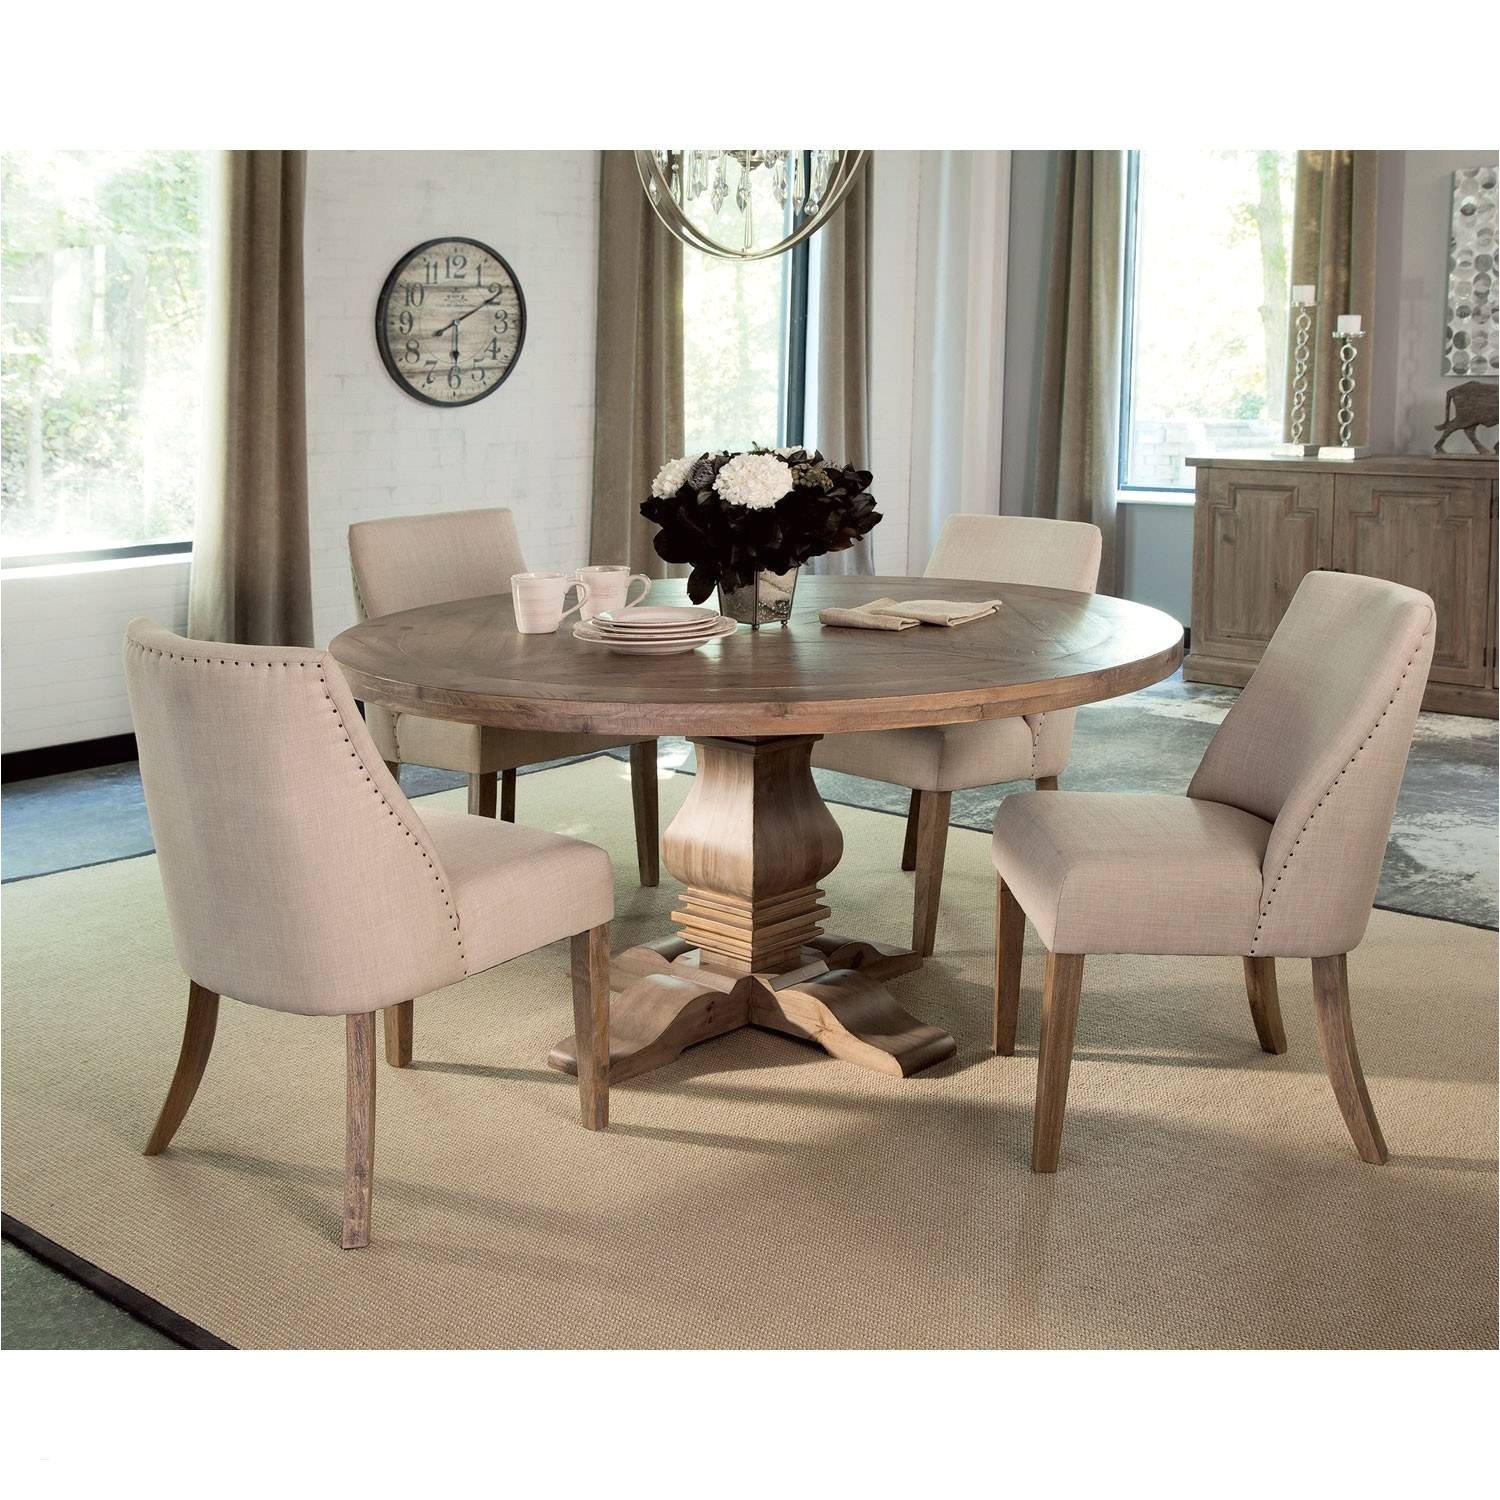 wayfair furniture dining room sets best of furniture design wayfair furniture store locations unique awesome